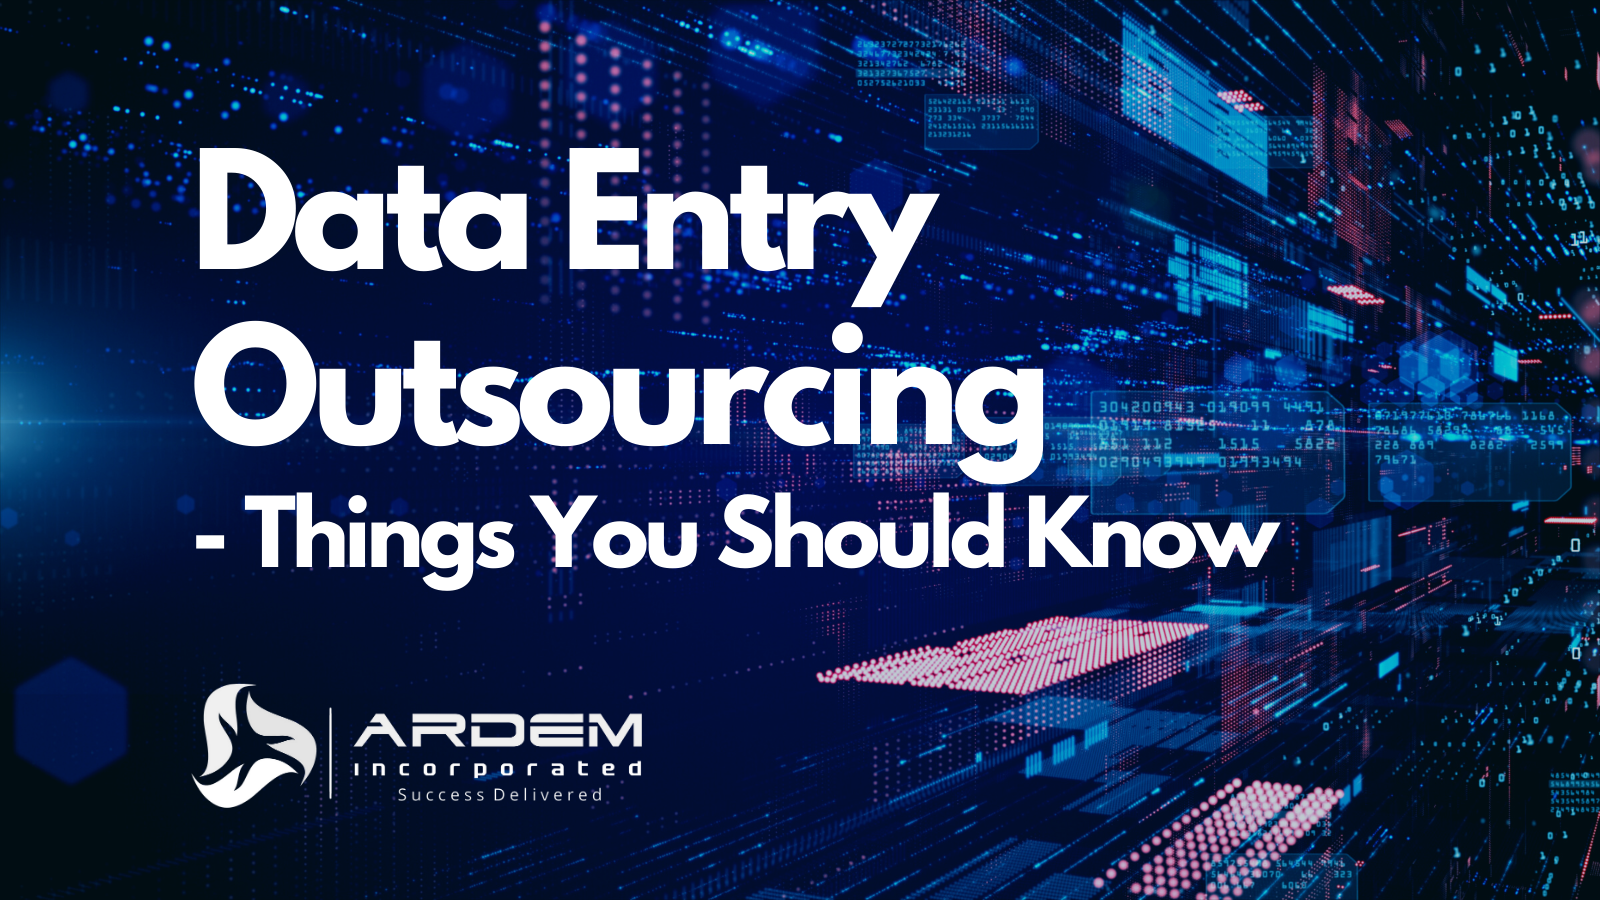 Data Entry Outsourcing Blog